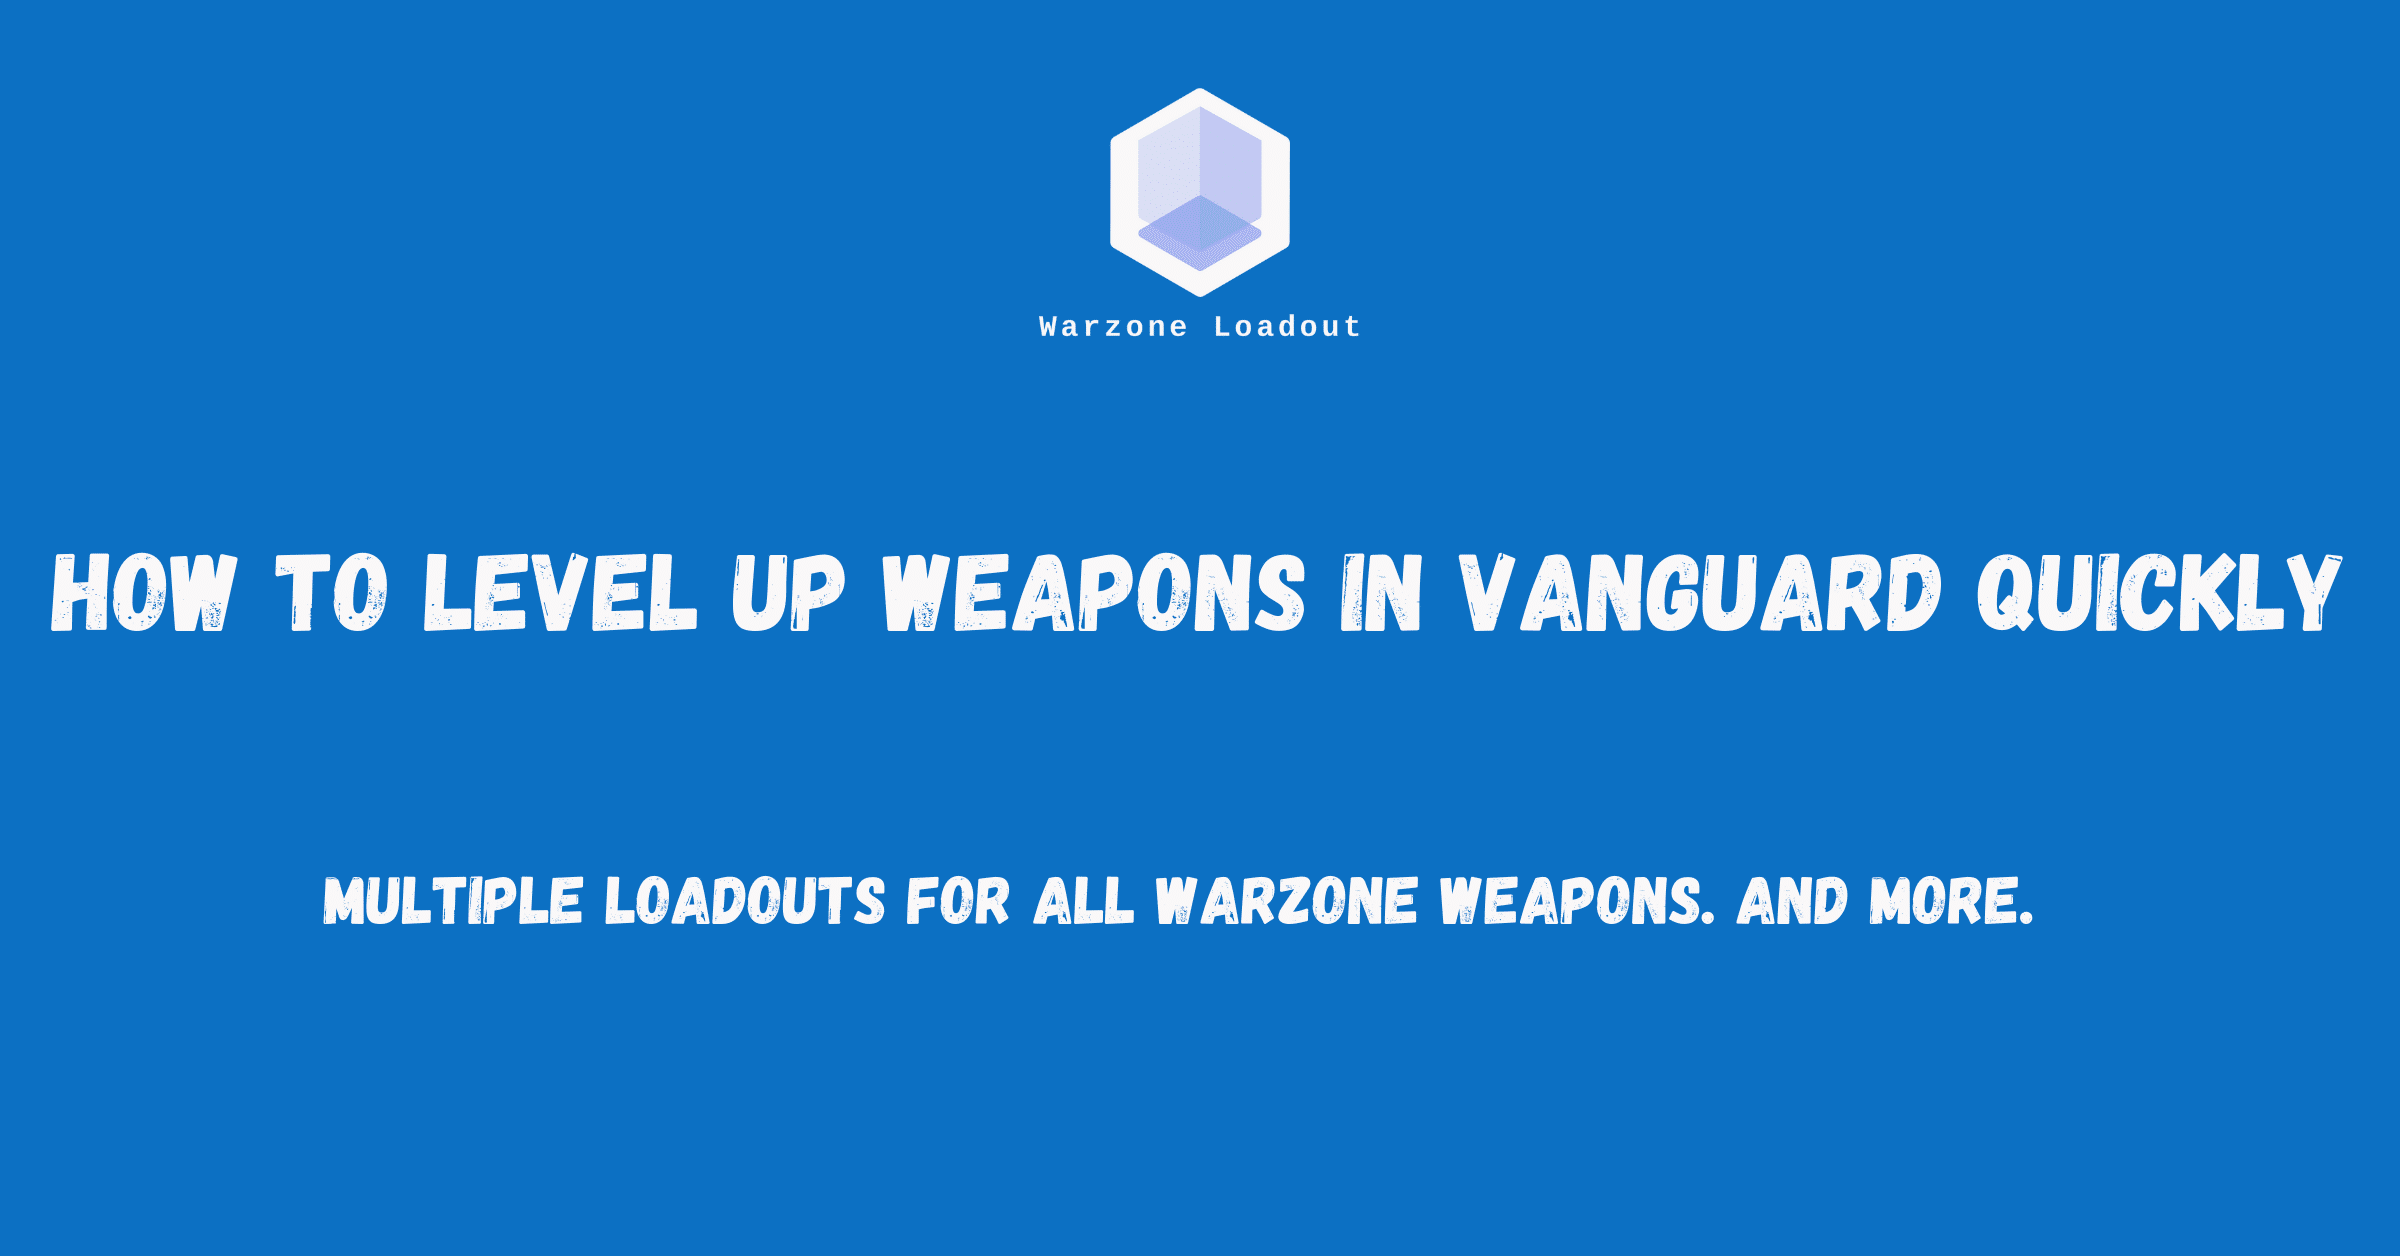 How to level up weapons fast in Vanguard